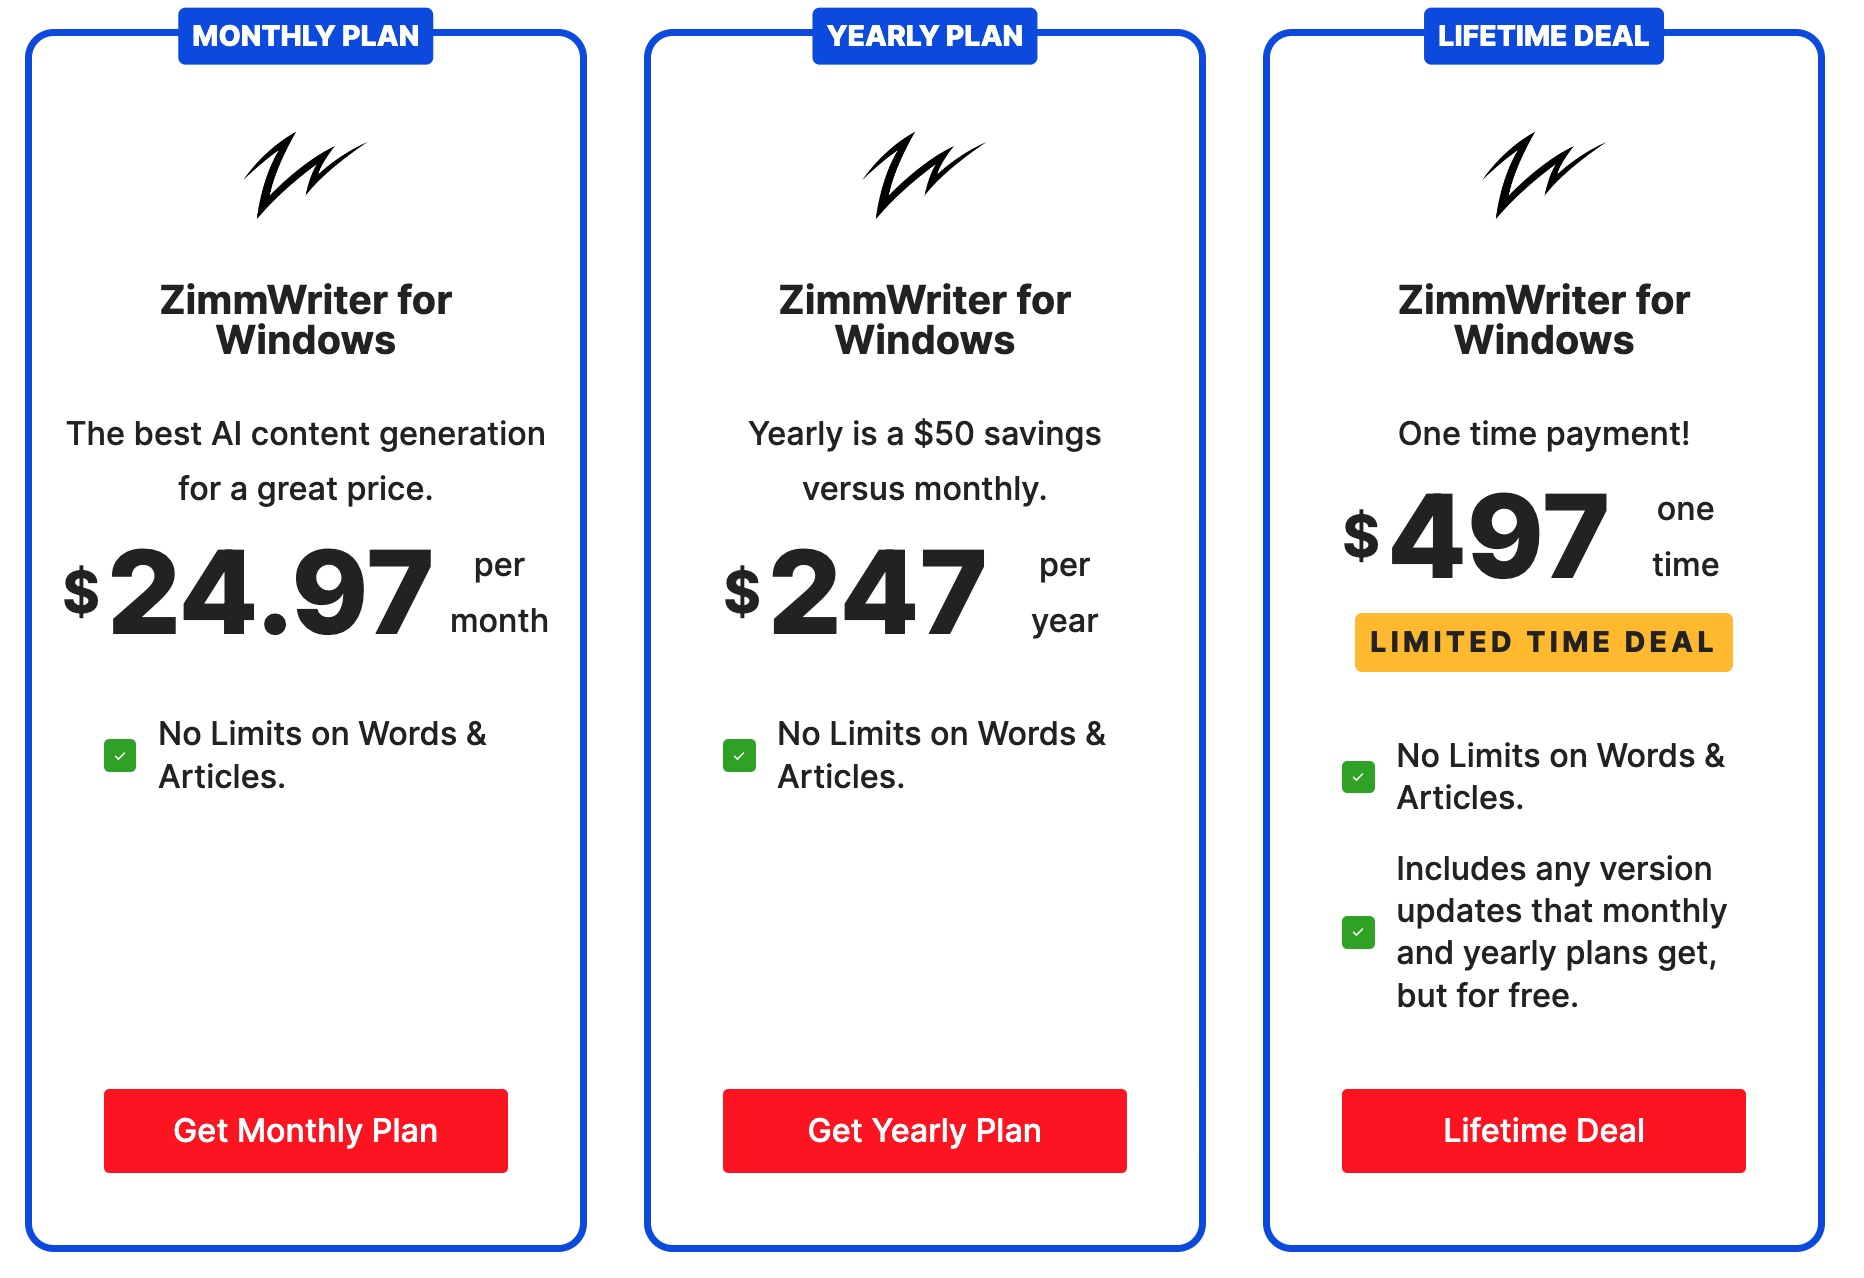 zimmwriter lifetime deal pricing